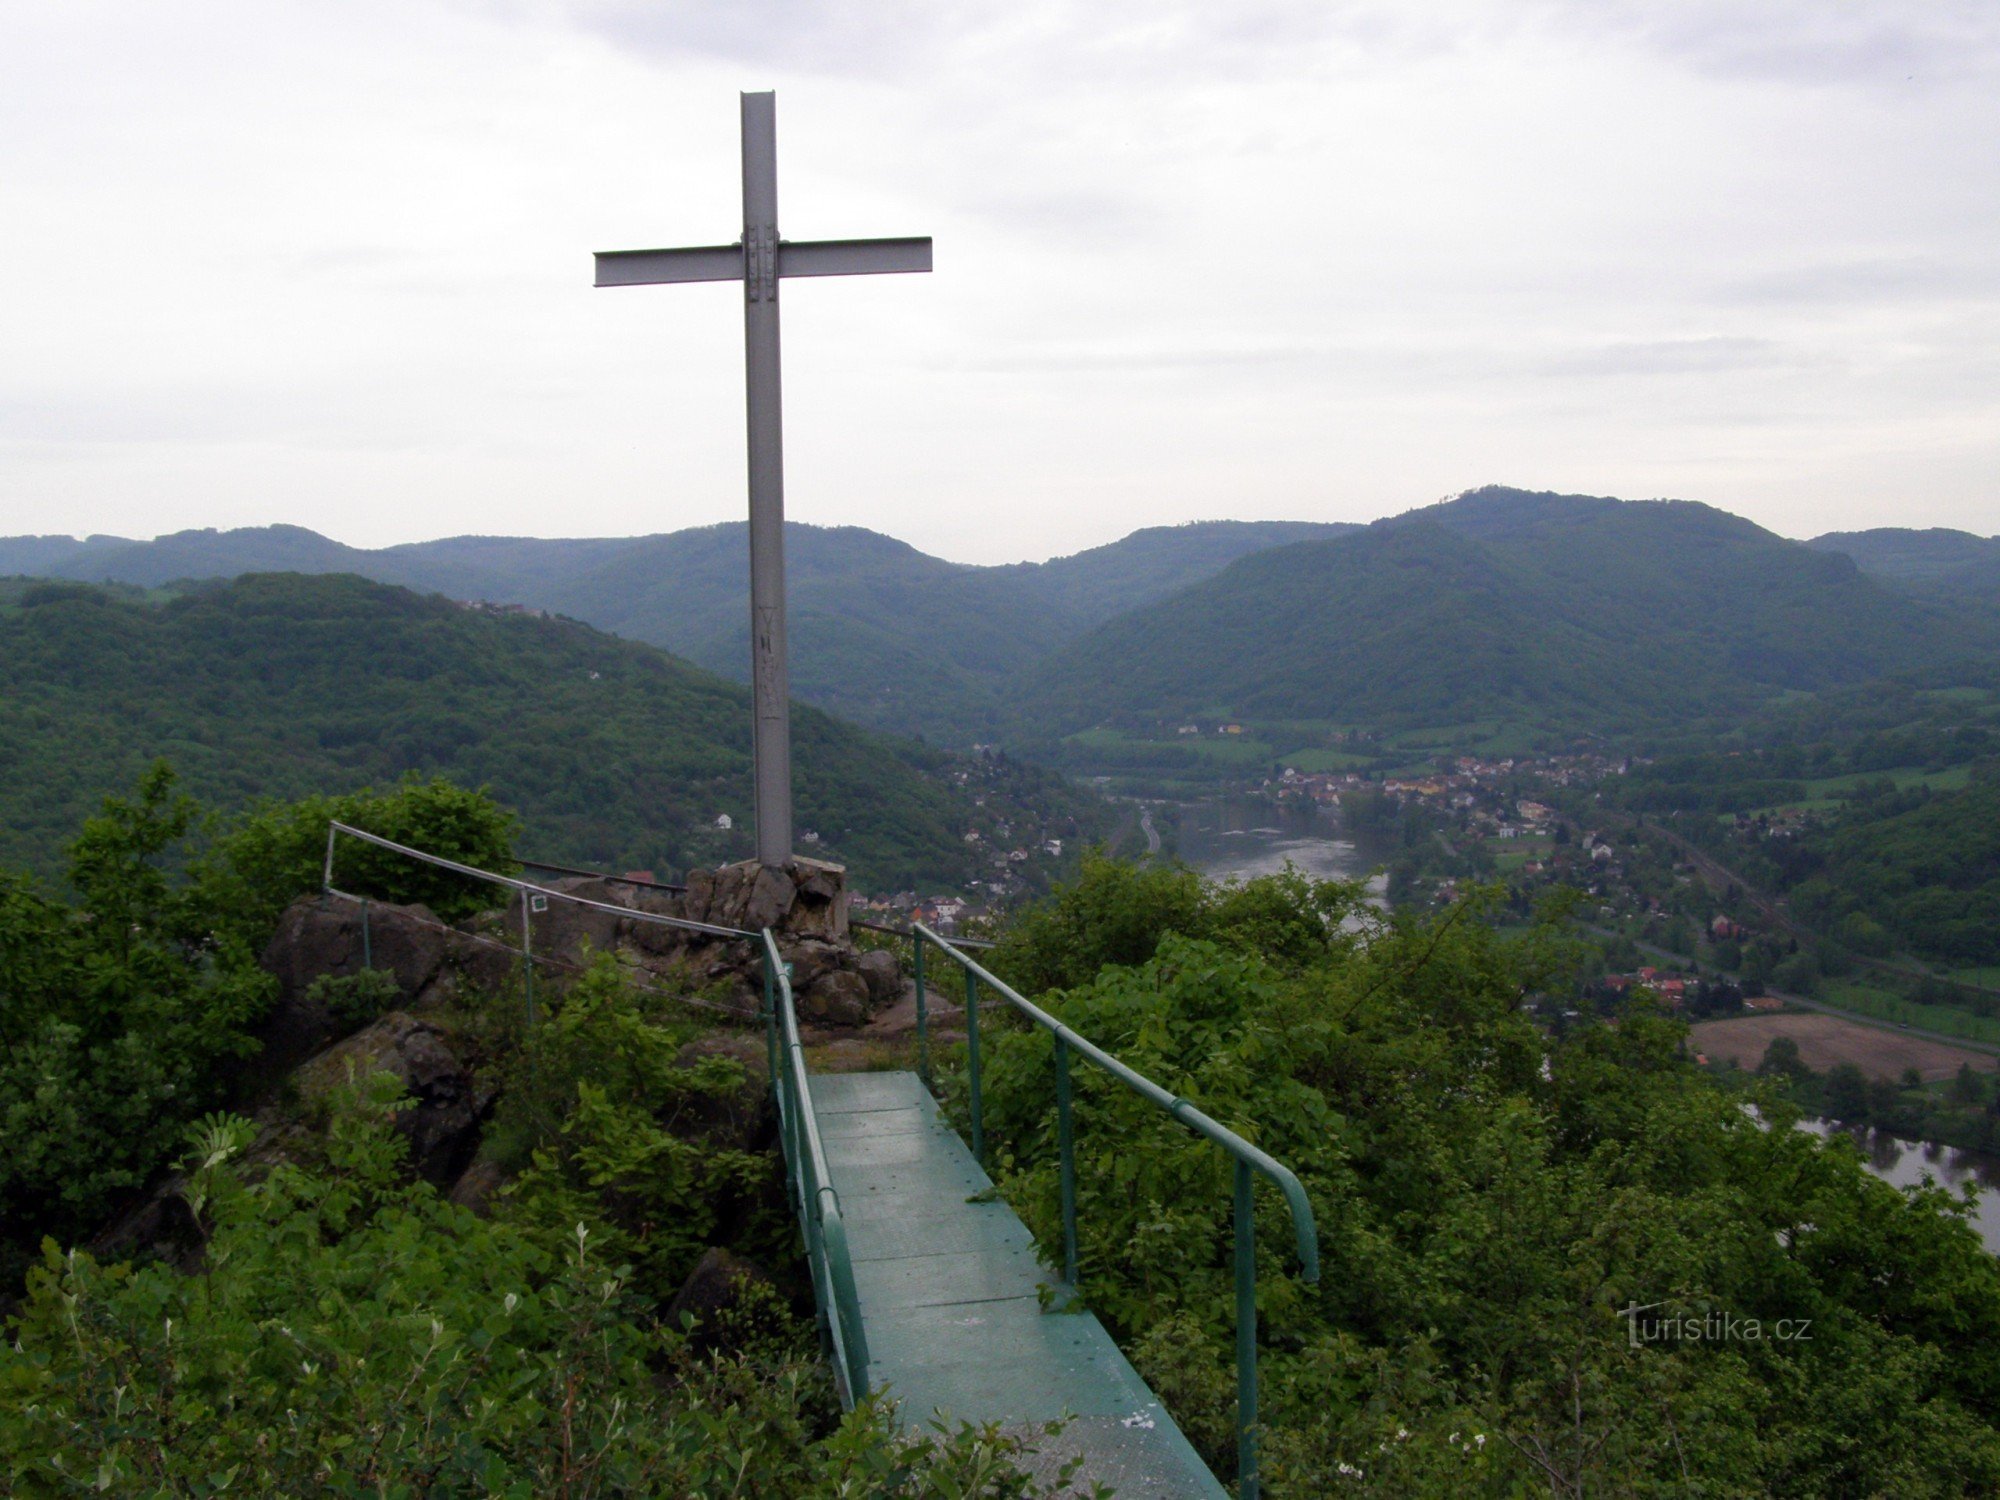 the Miller's Cross viewpoint